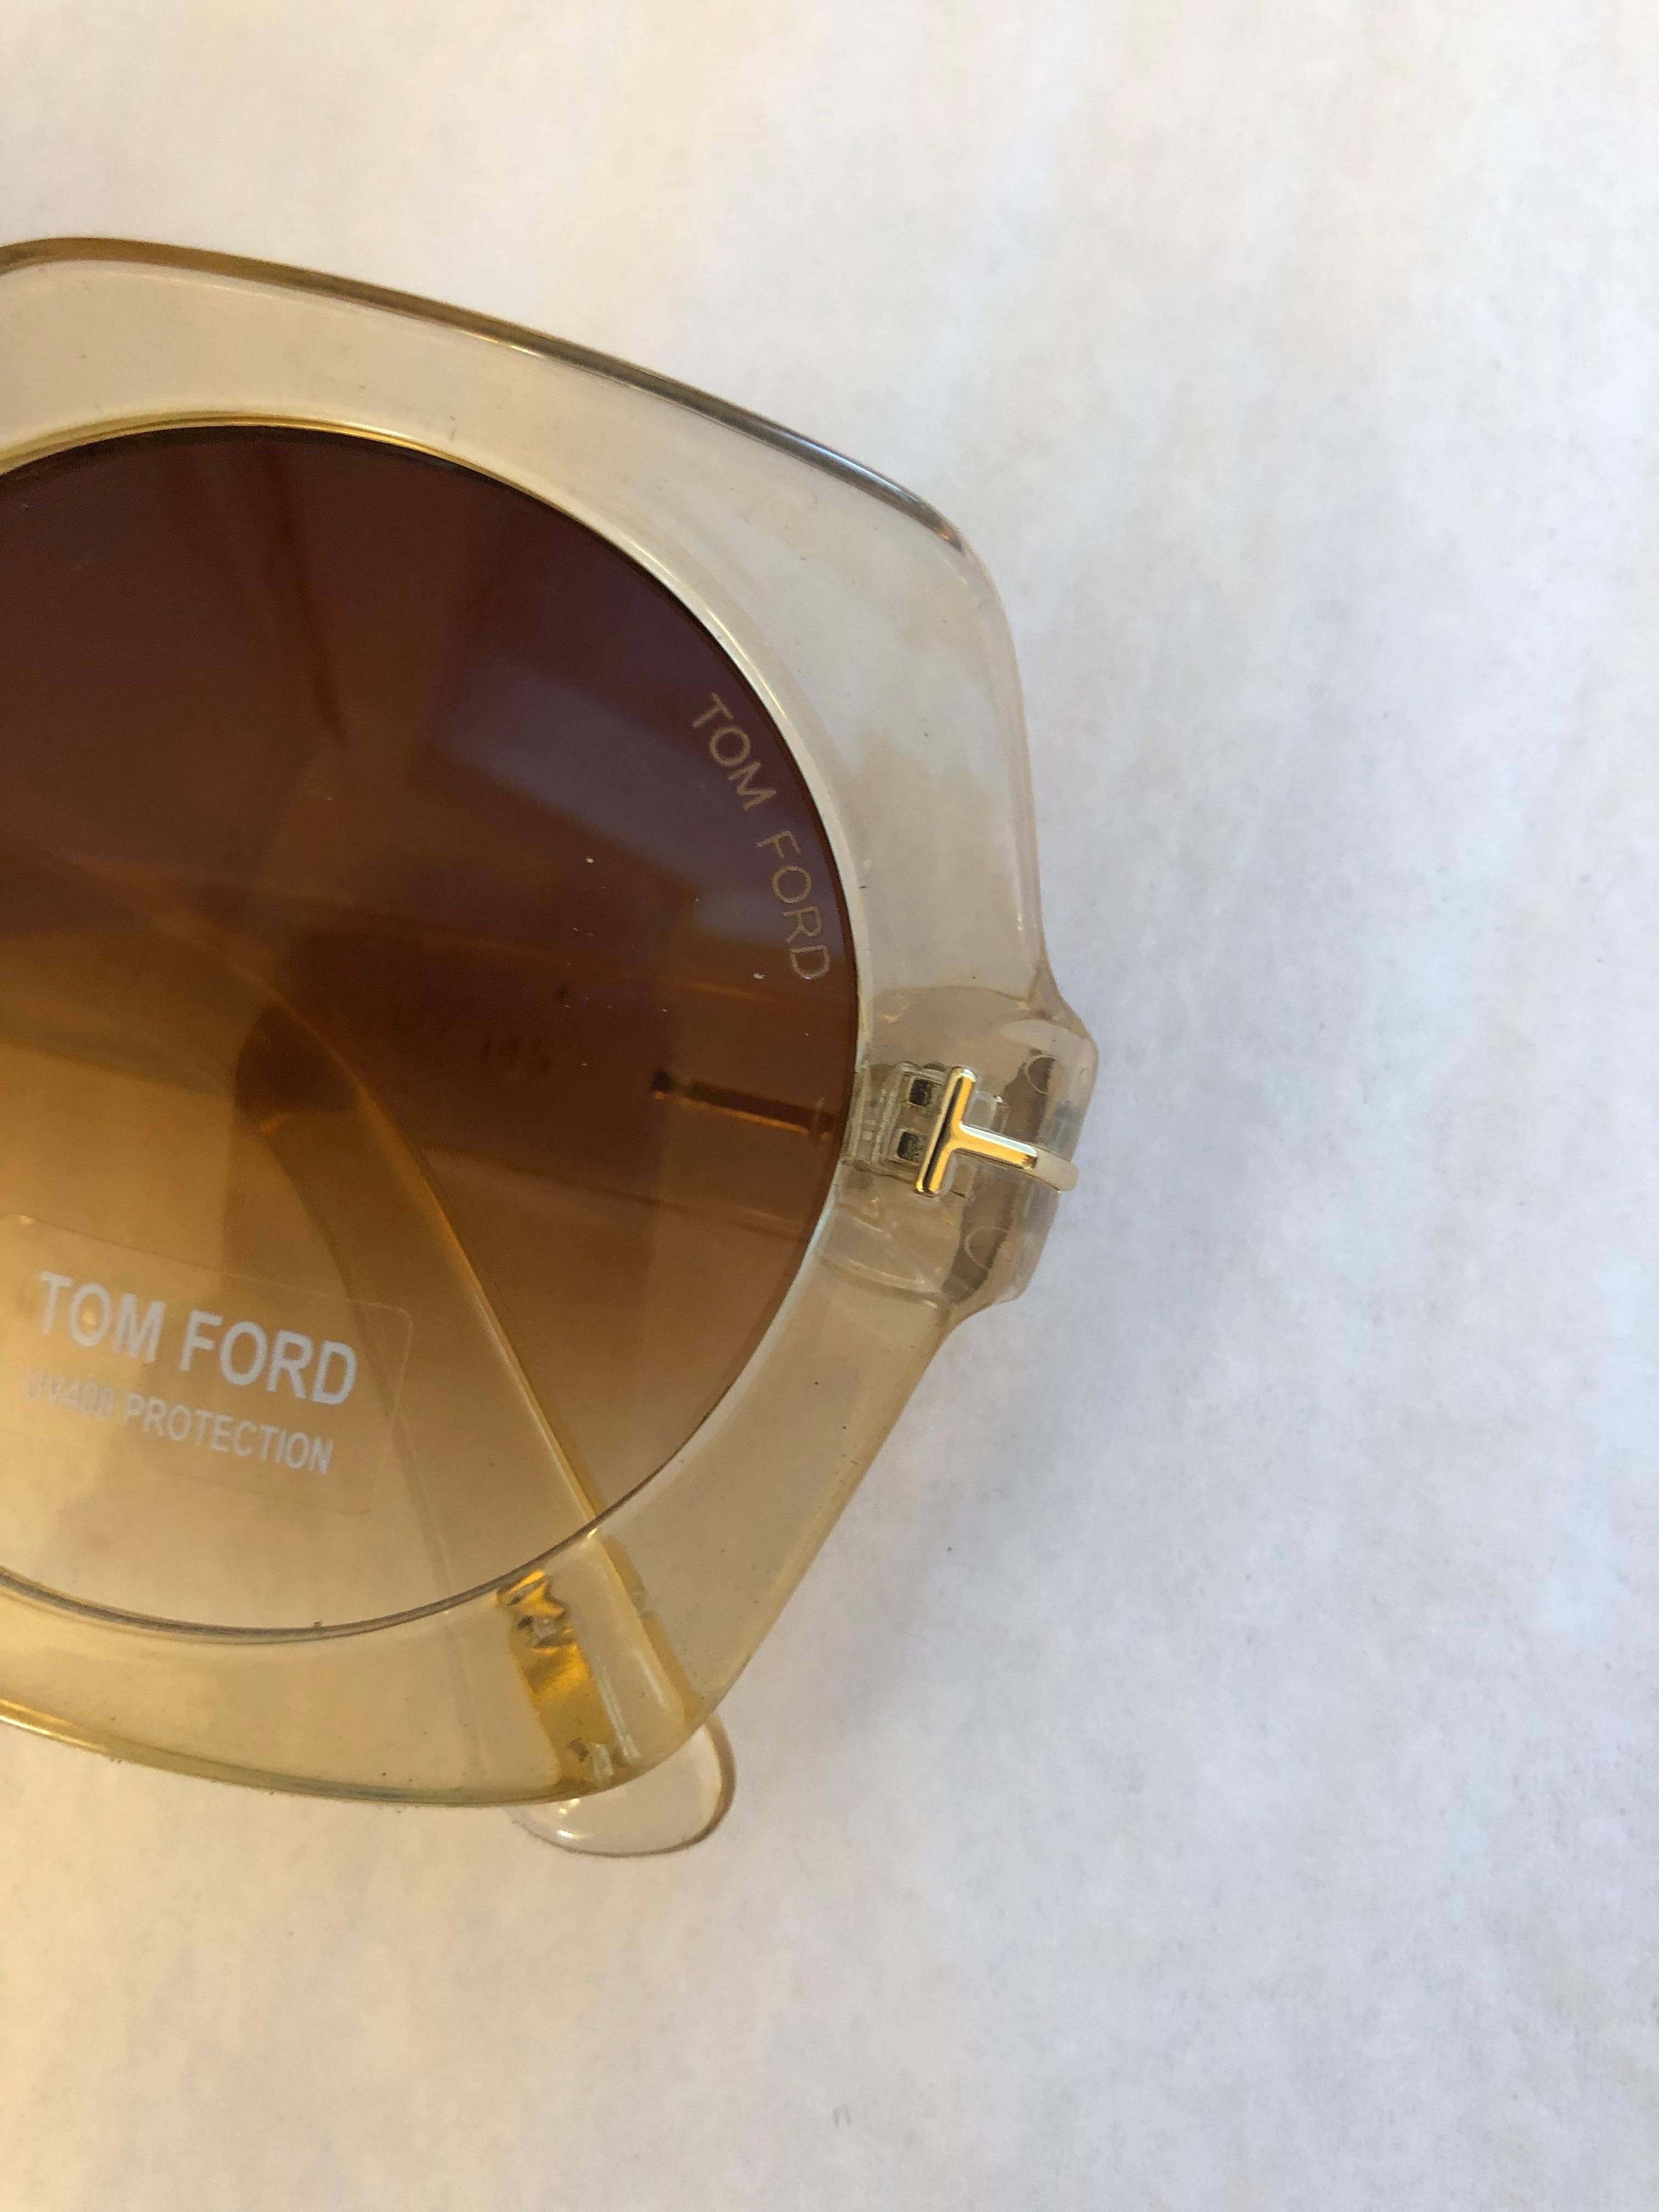 Tom Ford Sofia Sunglasses FT 0535 in Pale Gold Tone Never Worn w/Case and Box 1